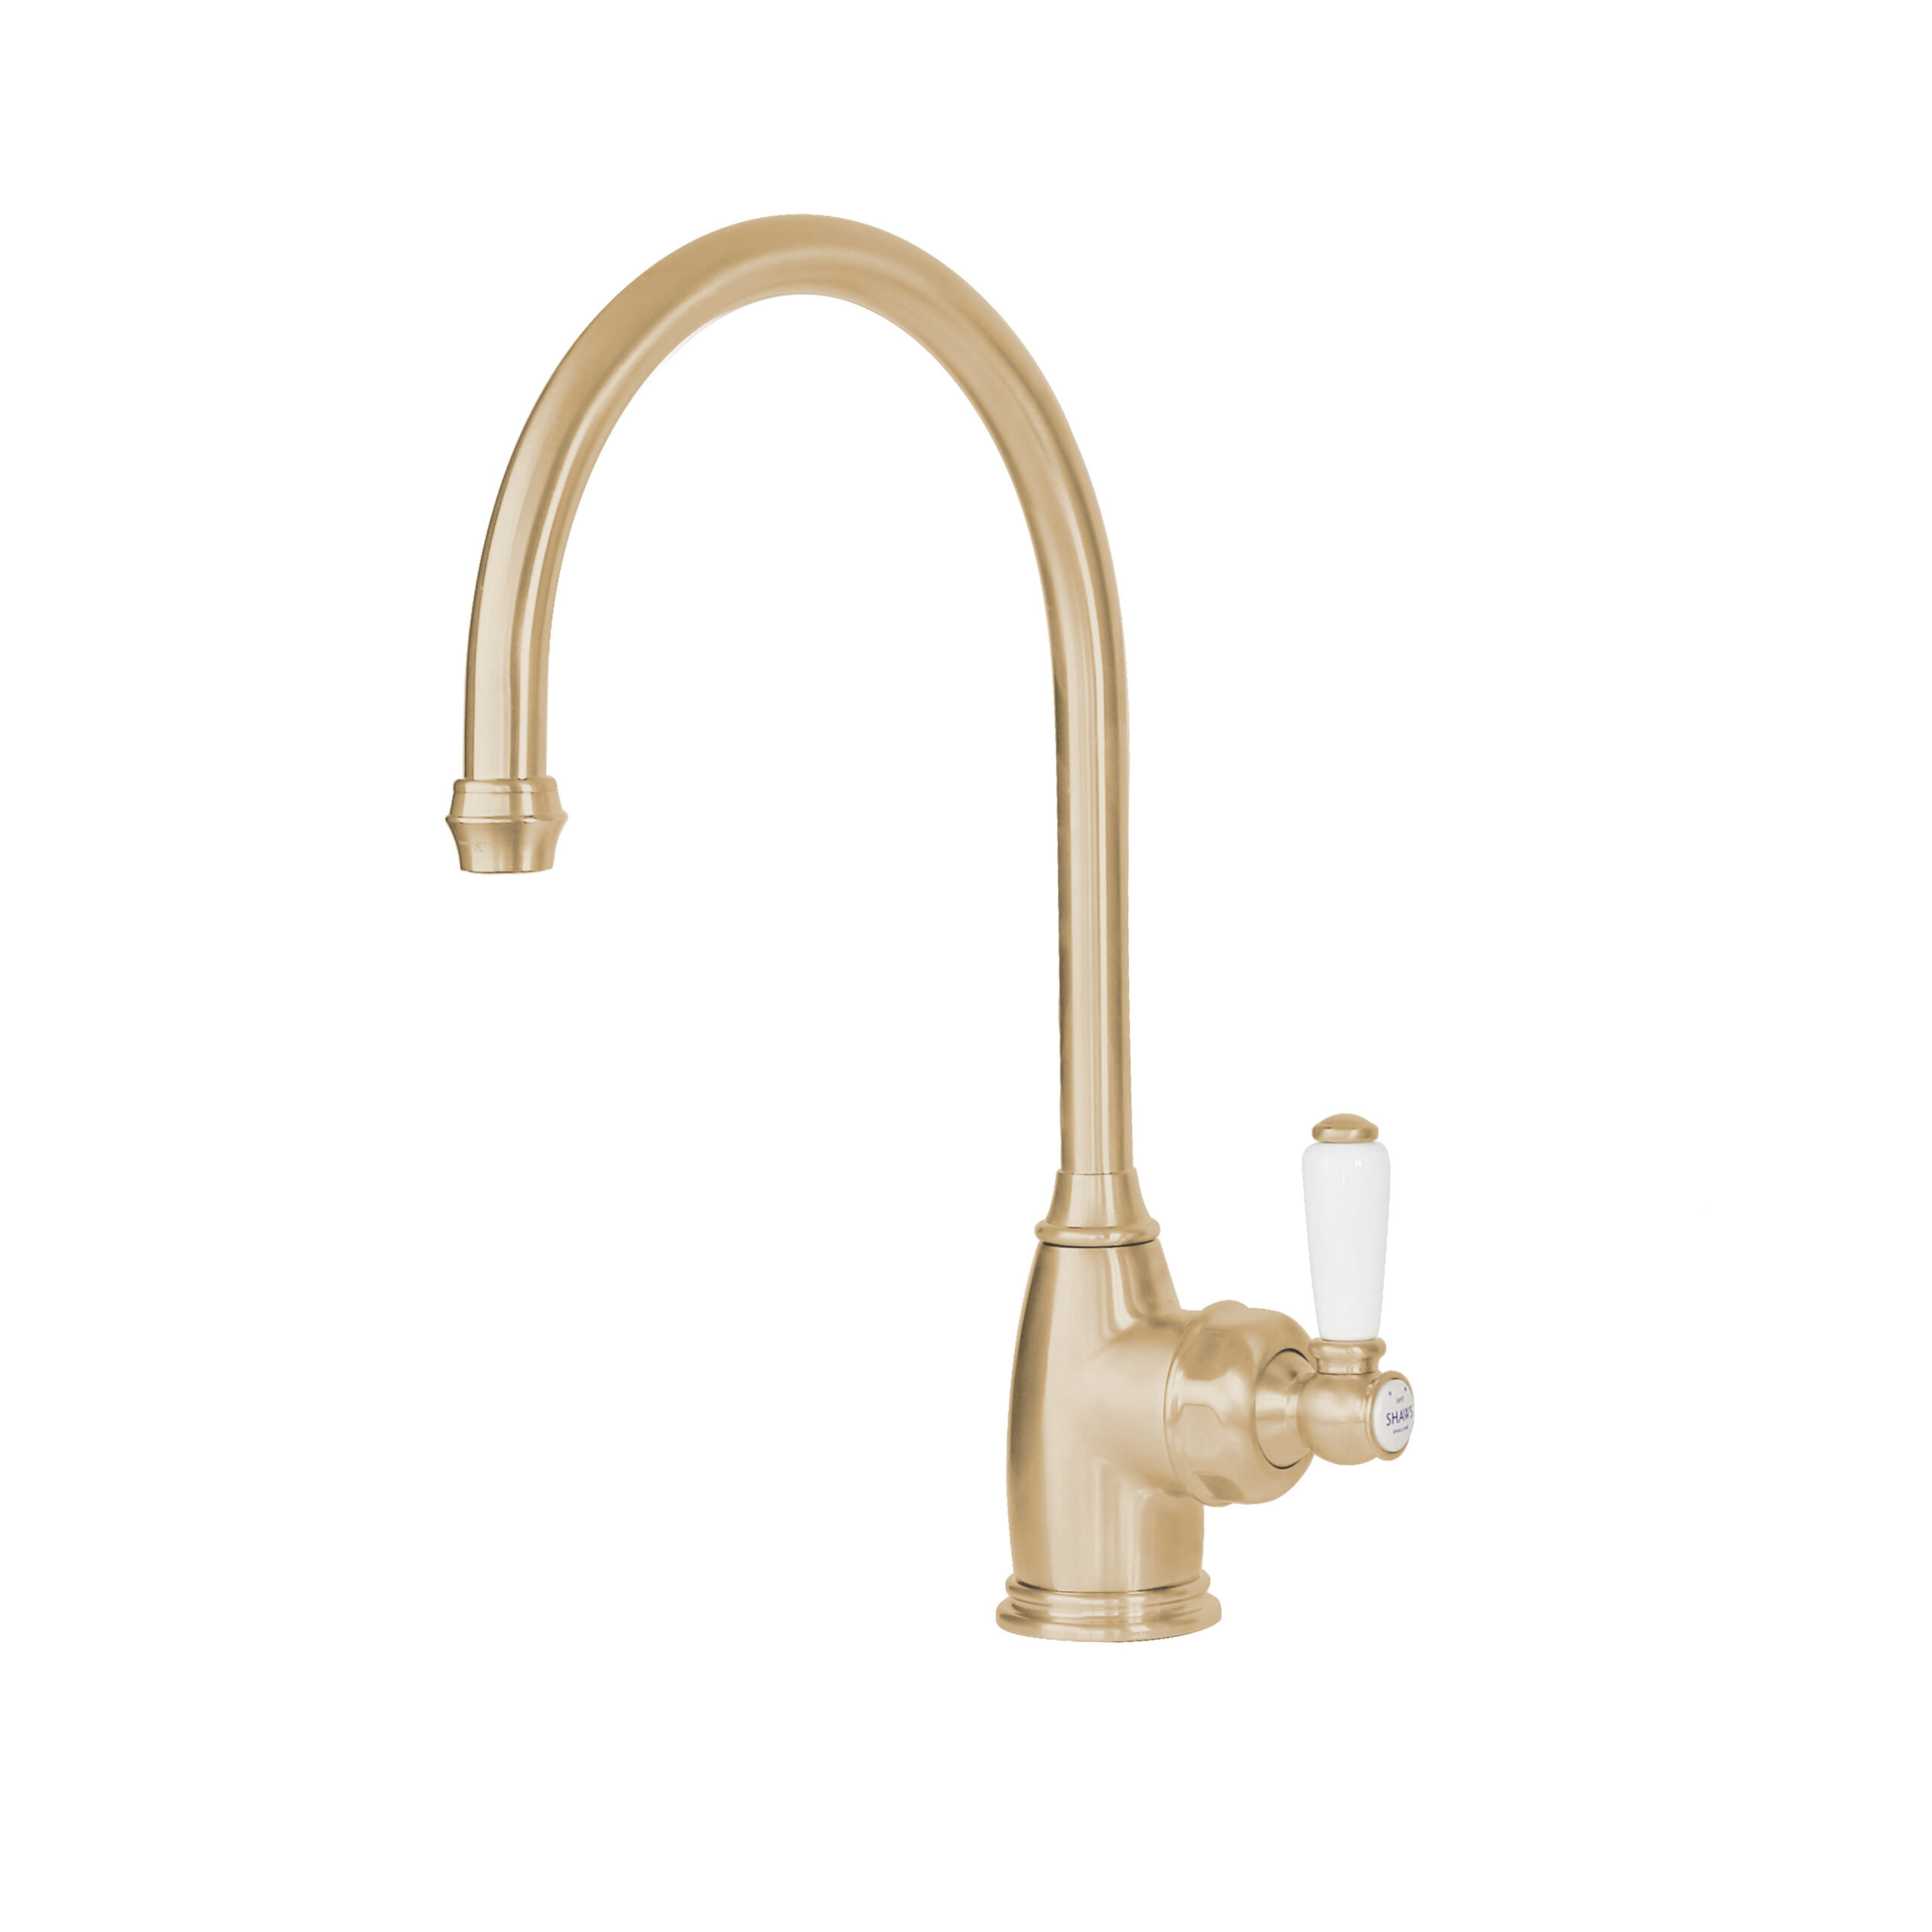 Shaws by Perrin & Rowe Yarrow kitchen mixer in Satin Brass. Parthian style monobloc kitchen tap AUSH.4341. Distributed in Australia by Luxe by Design, Brisbane.